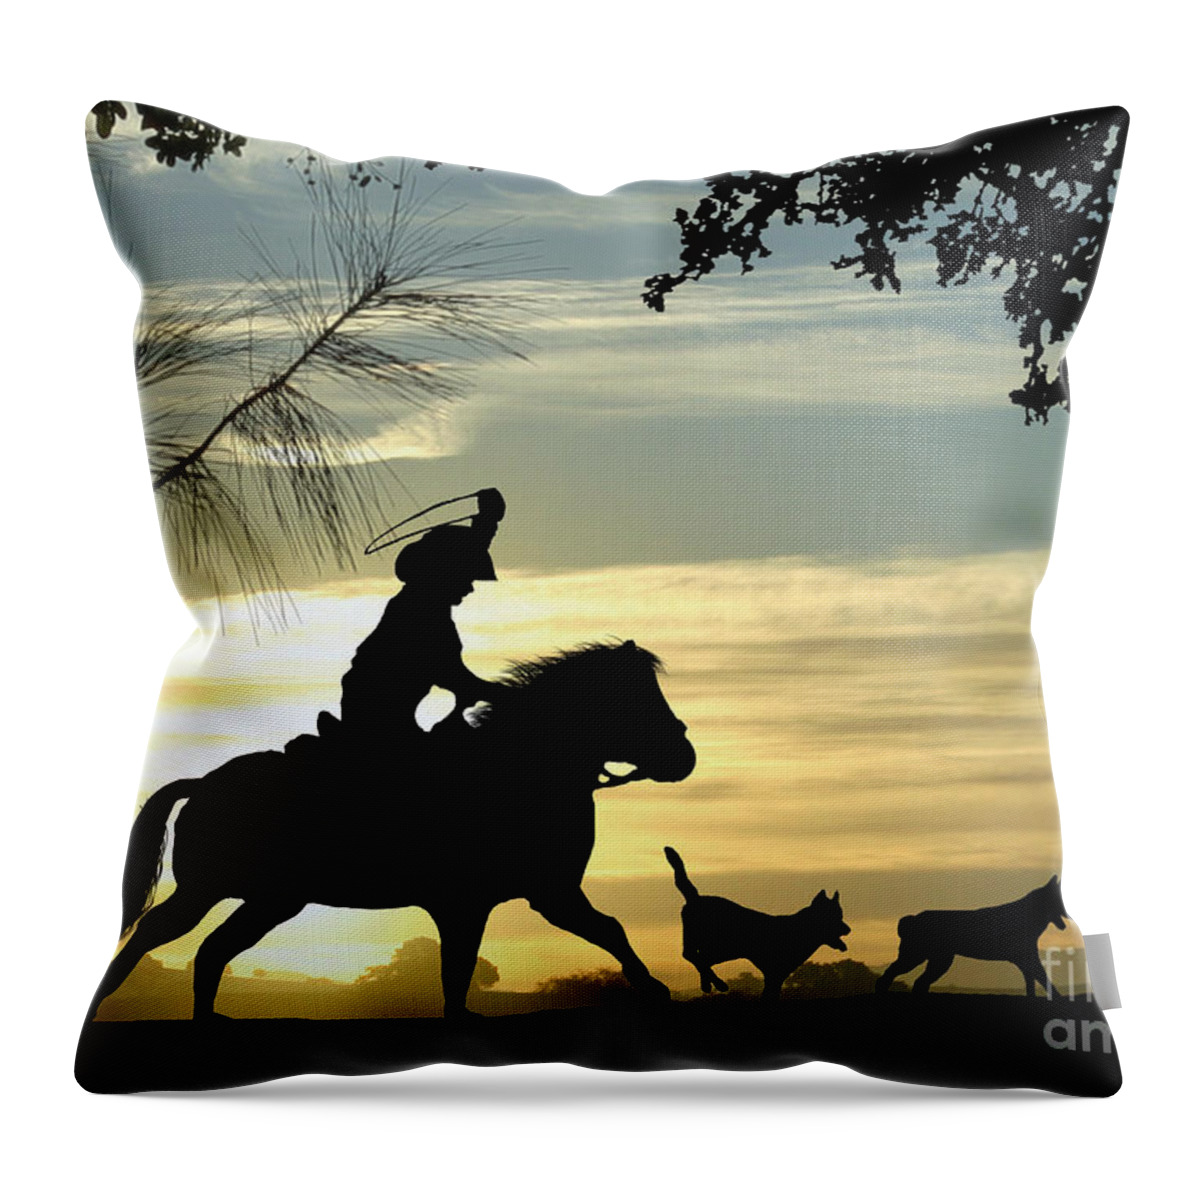 Cowboy Throw Pillow featuring the photograph Lil' Cowboy by Stephanie Laird